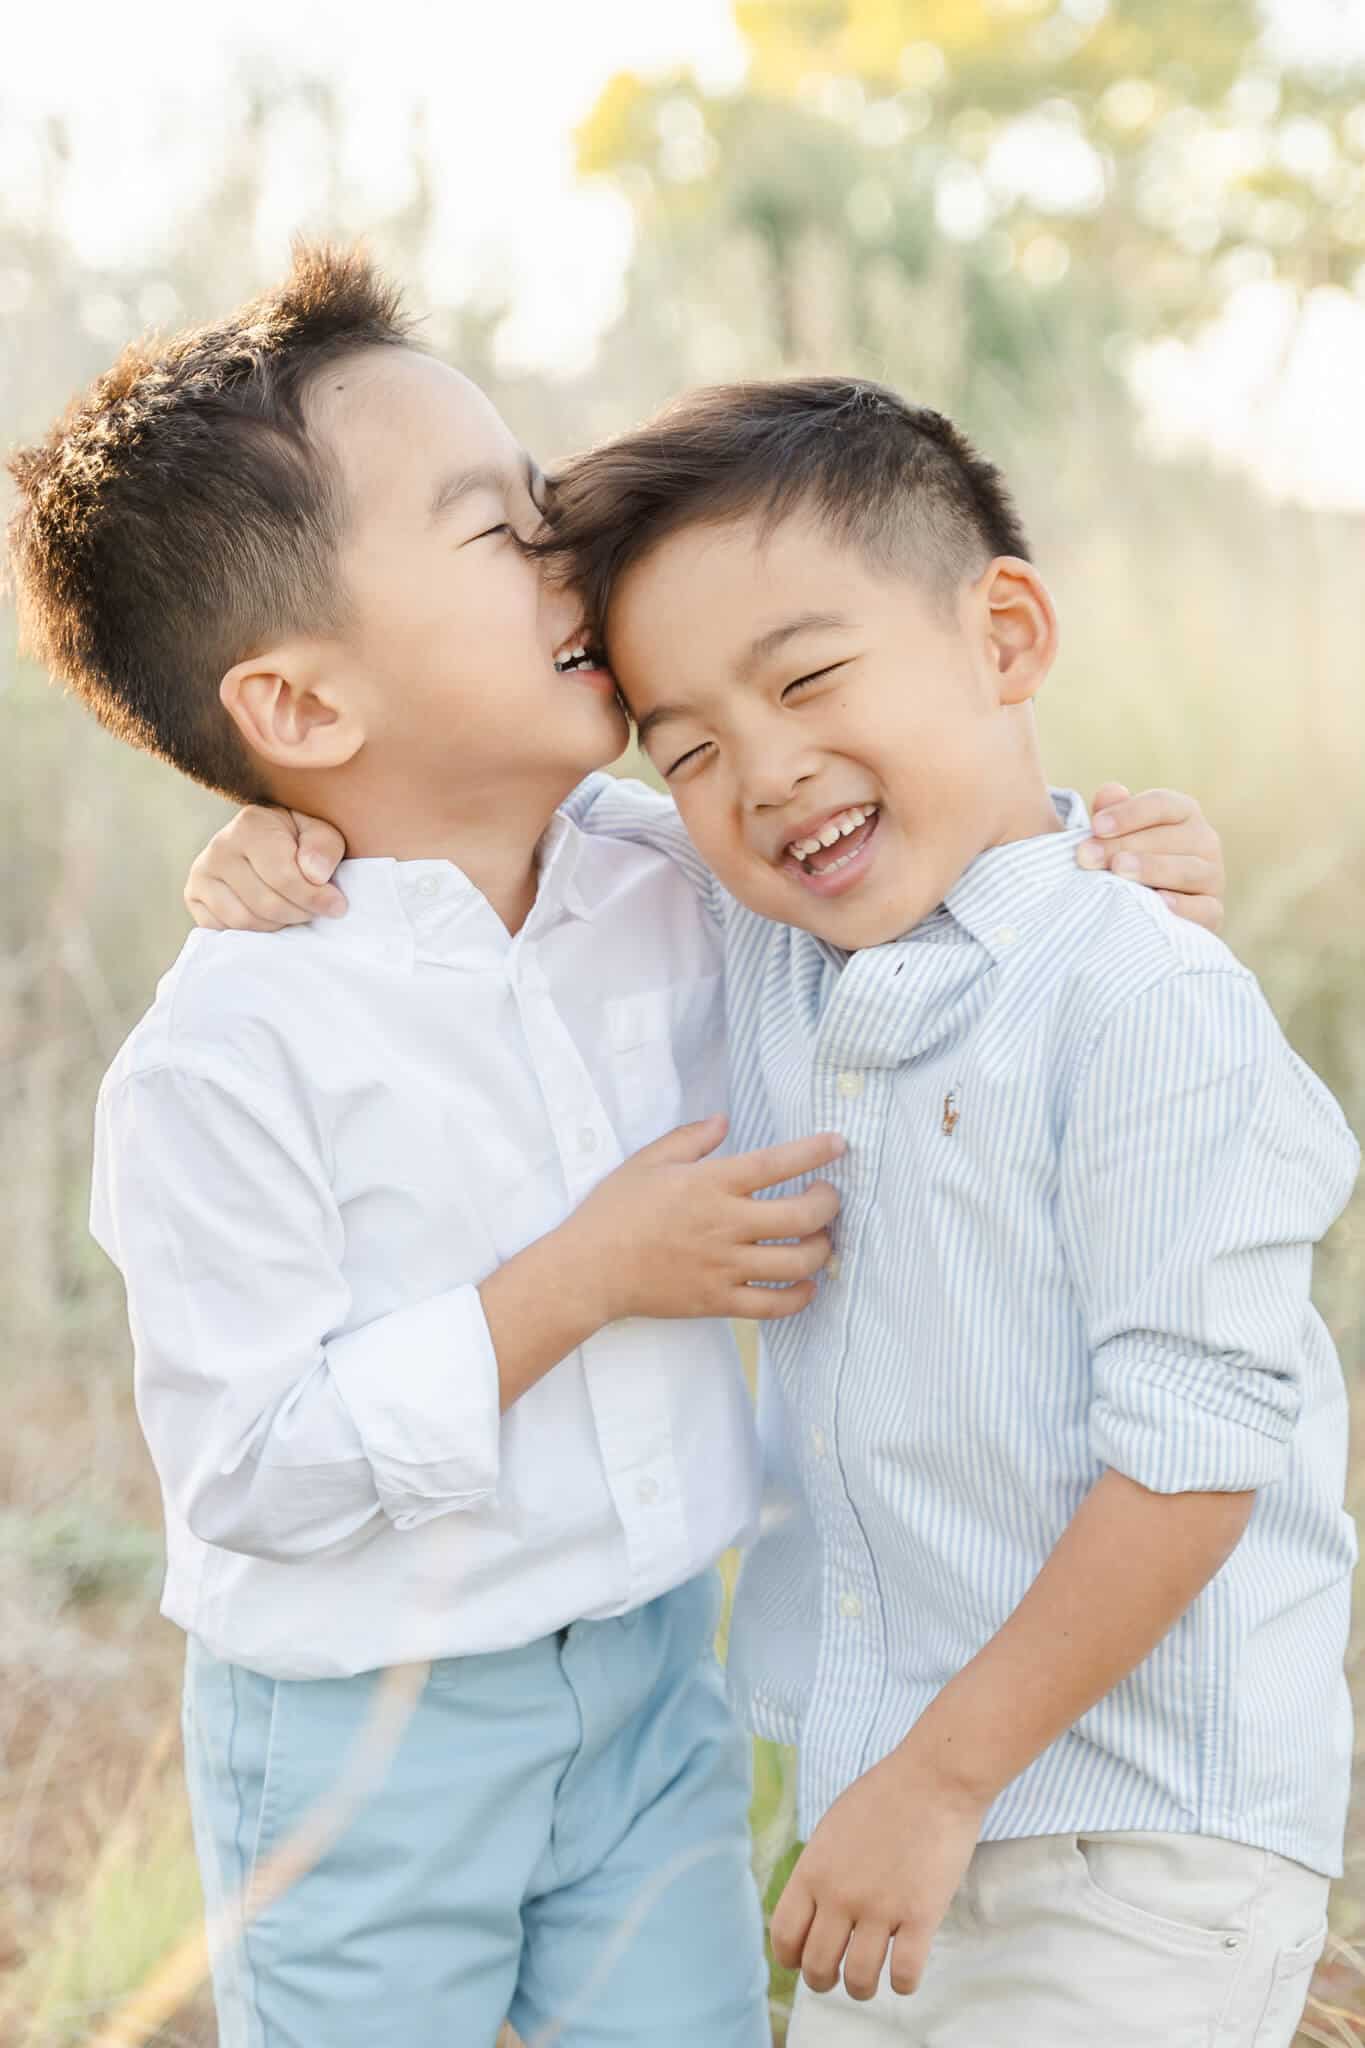 Two twin boys hugging each other with one kissing the other on the side of the head.